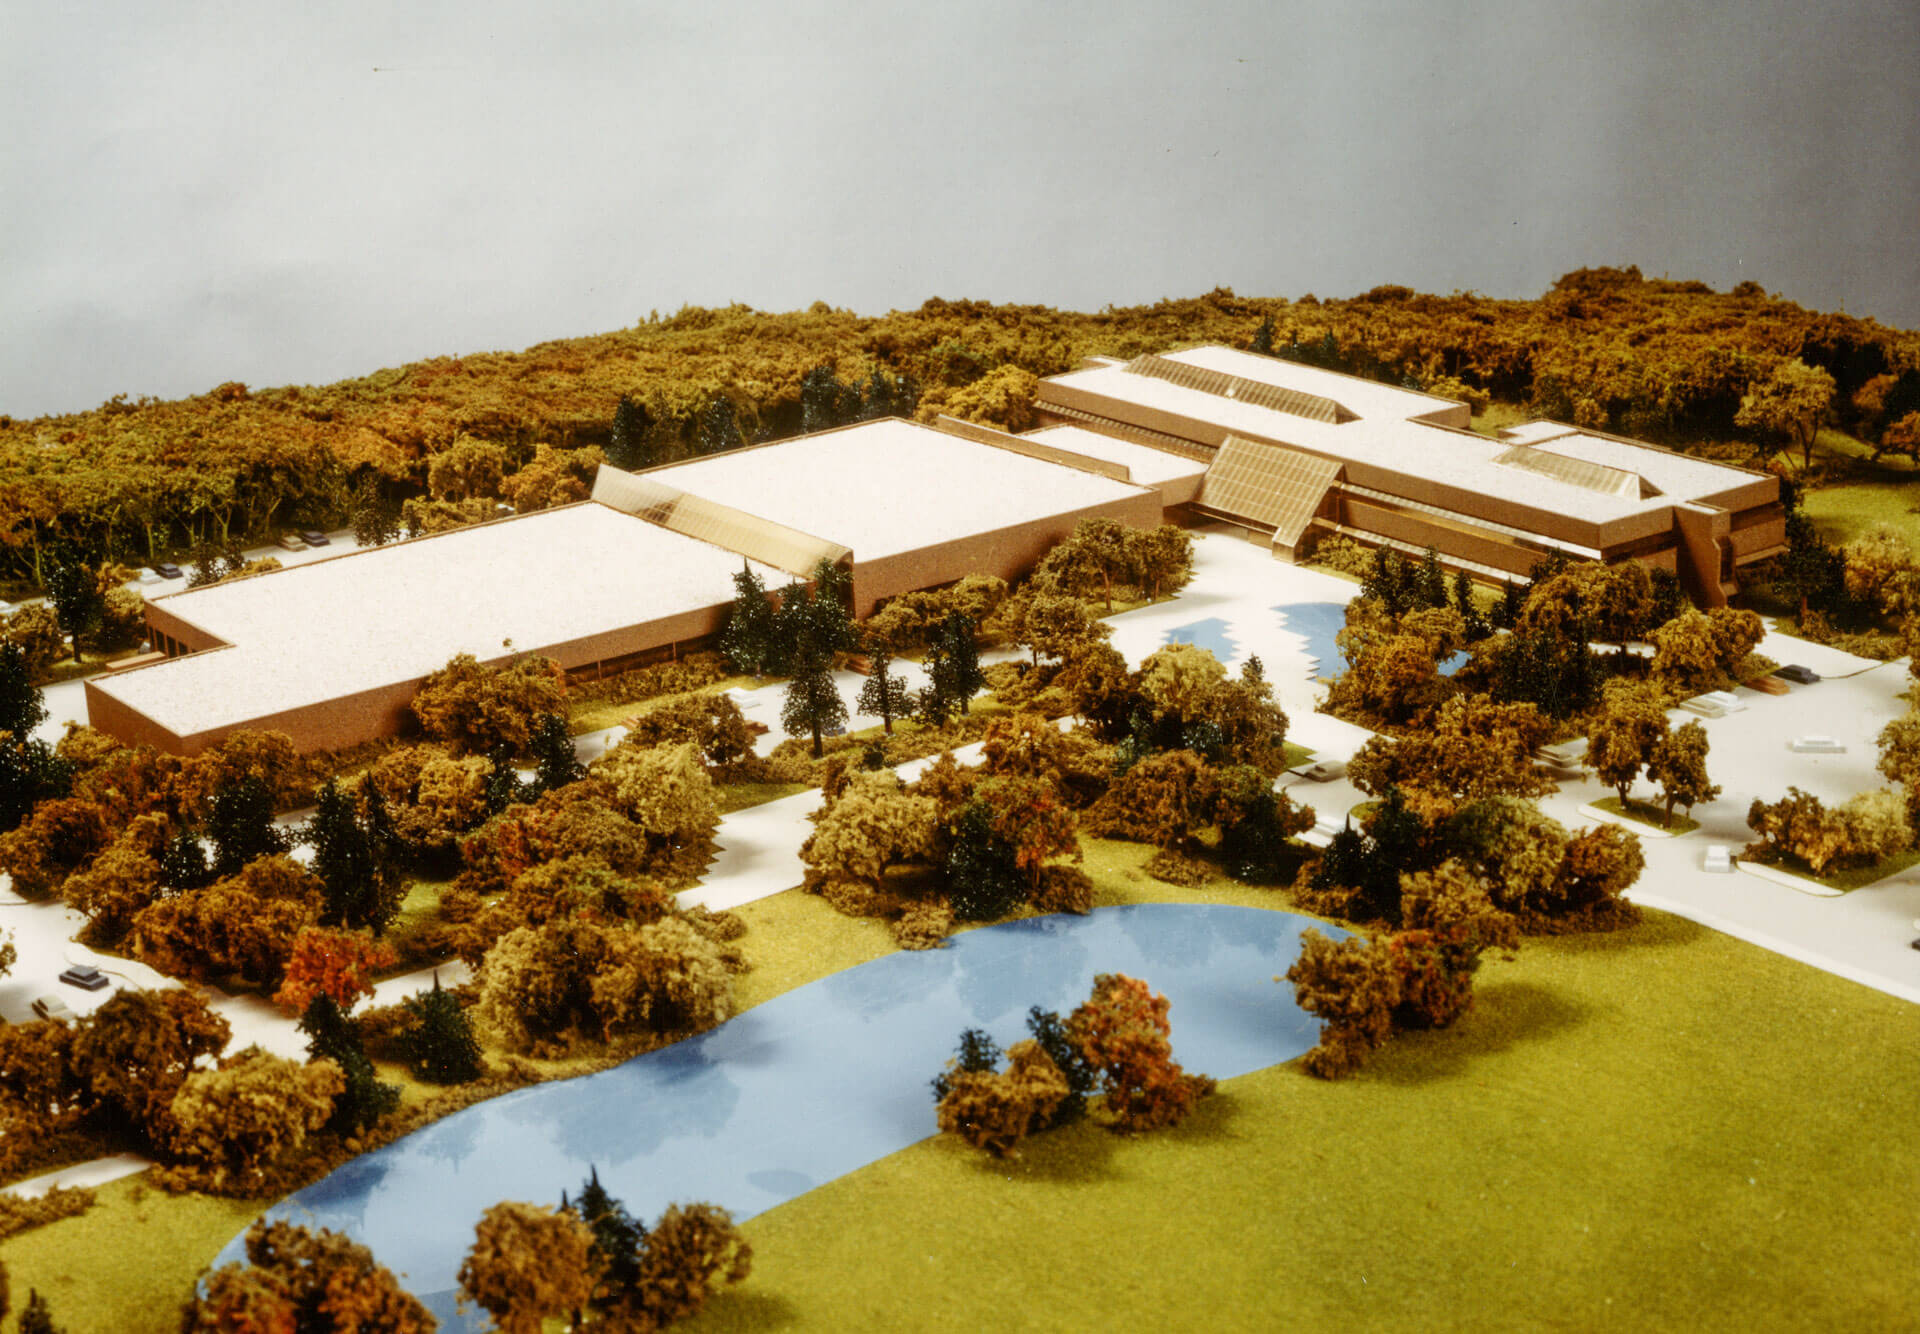 3D model of Athabasca University campus